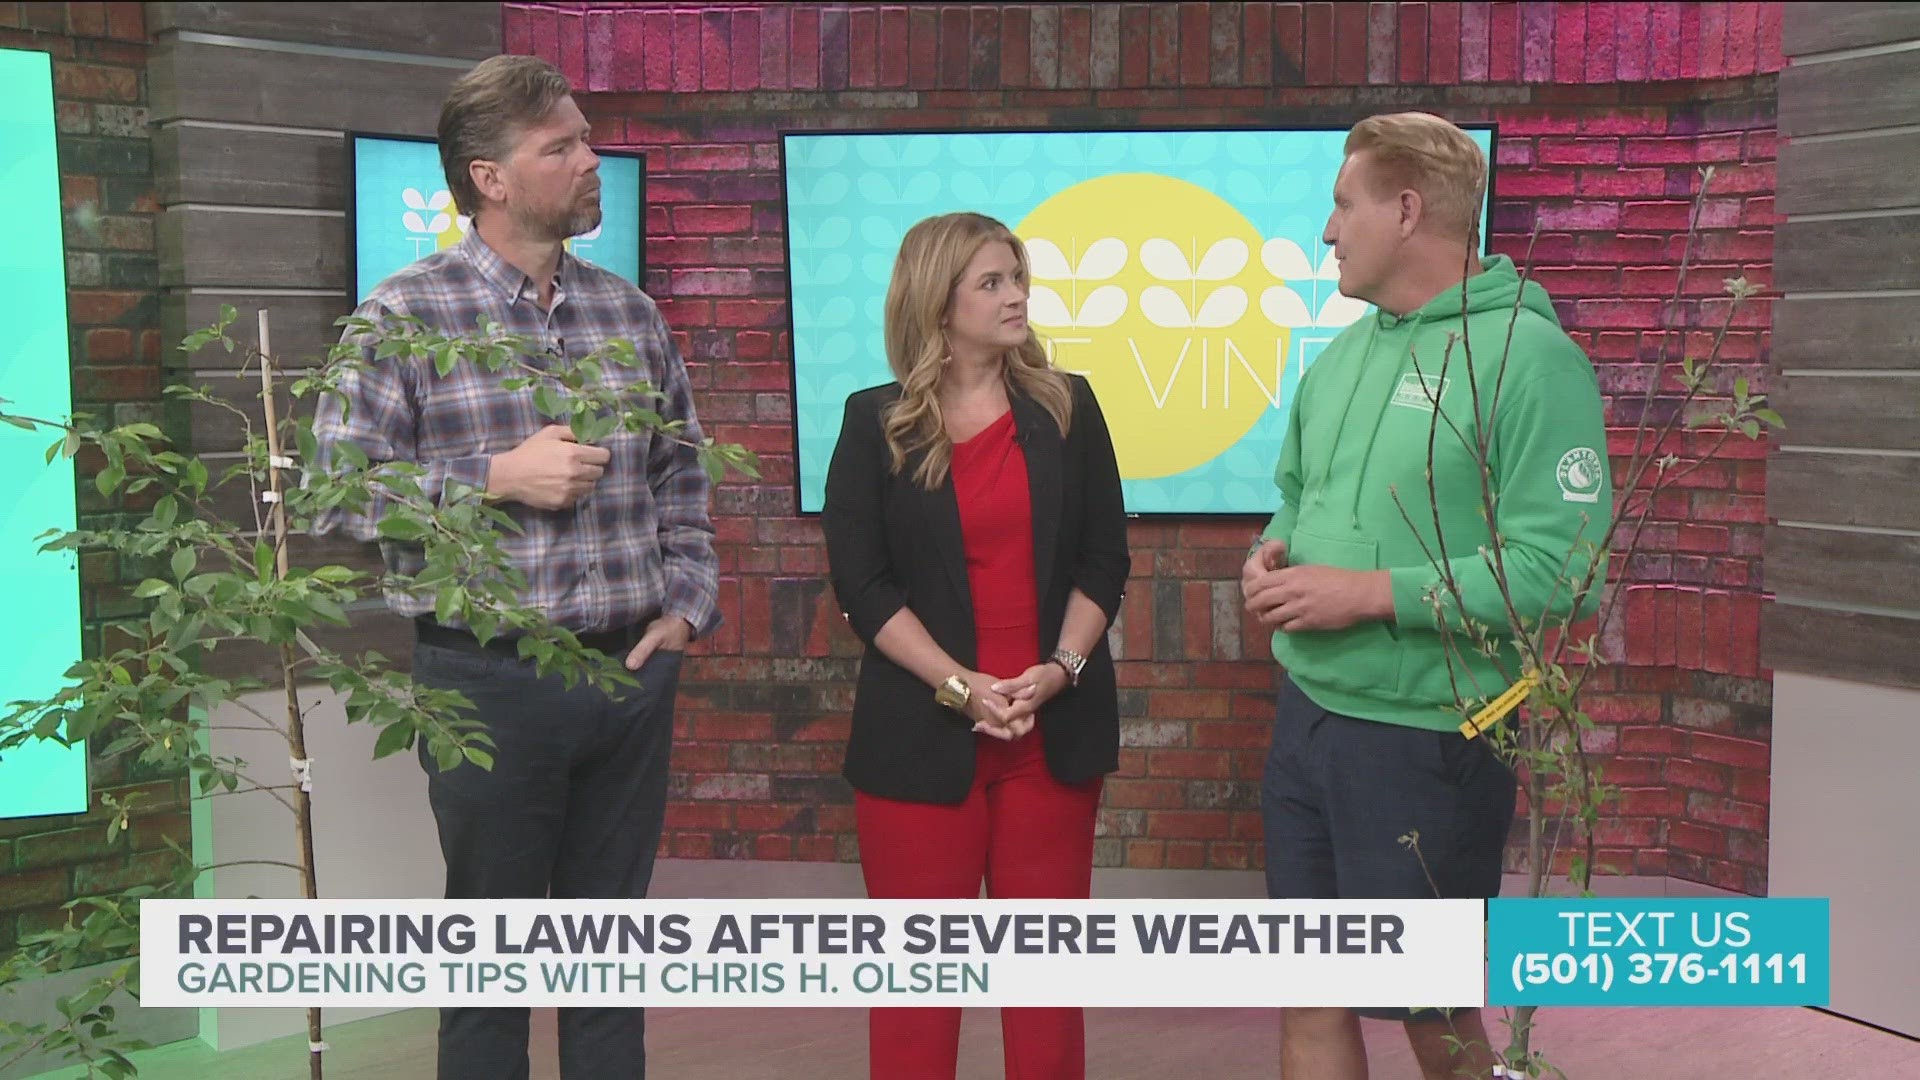 Chris H. Olsen tells us how you can start rebuilding your yard after storms.